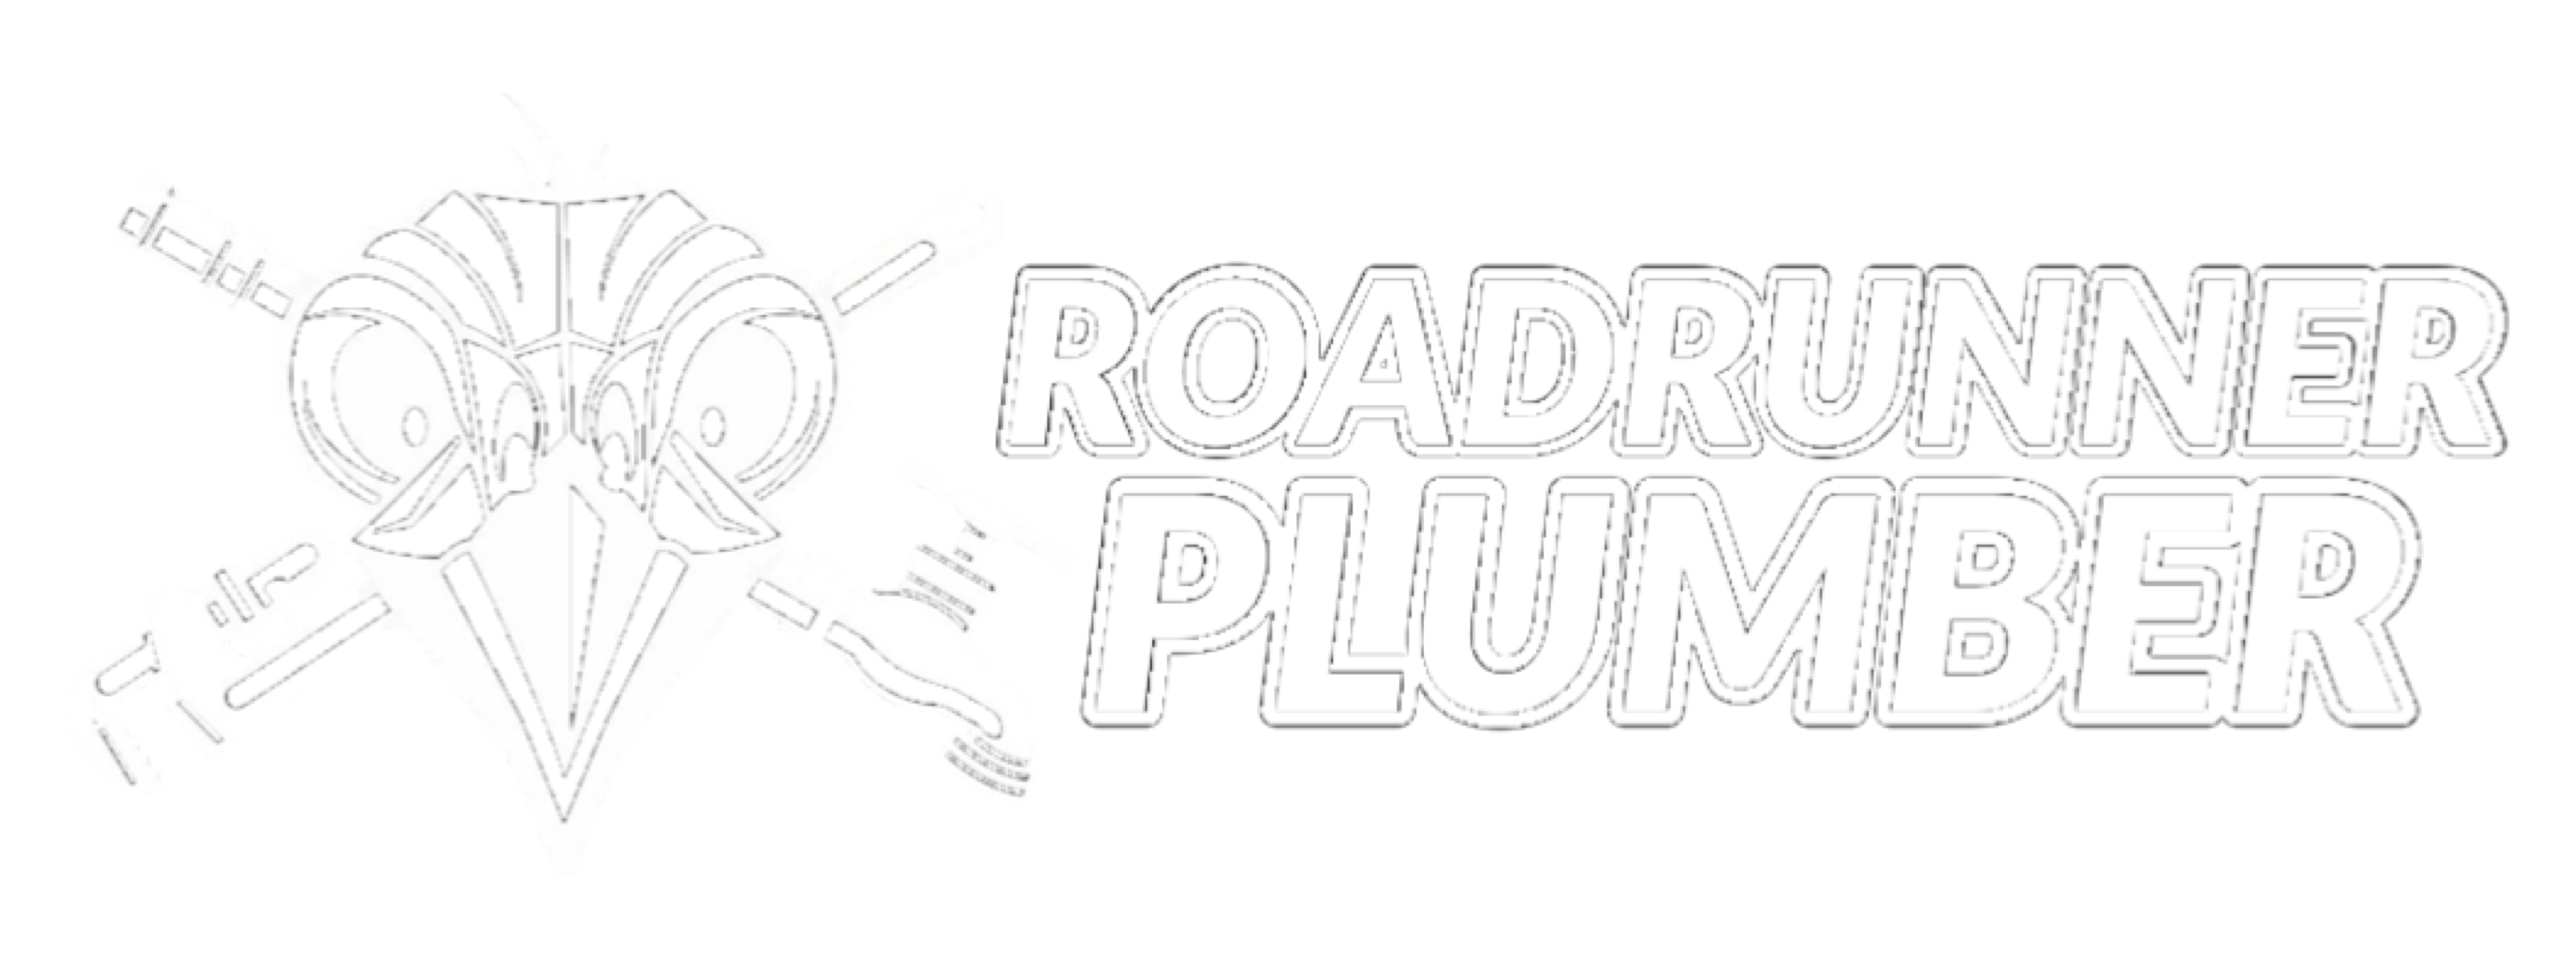 Roadrunner Plumber Rooter Unclog Pipe Repair Plumbers near me Plumbing, Drain Cleaning, Video Inspection, Water Hydro Jetting Sewer Line Repair Heater Toilet Sink Faucet Pipe Garbage Disposal filtration Softener Slab Leak Detection Line Rooter Contact Replacement Main Clean-Out Installation Service Services Repair Affordable, Contact, Terms of Use, Anthem, Arcadia, Avondale, Buckeye, Carefree, Cave Creek, El Mirage Glendale Goodyear Litchfield Park Maryvale Mesa New River Paradise Valley Peoria Phoenix Scottsdale Sun City Grand West Surprise Tempe, Tolleson Youngtown.